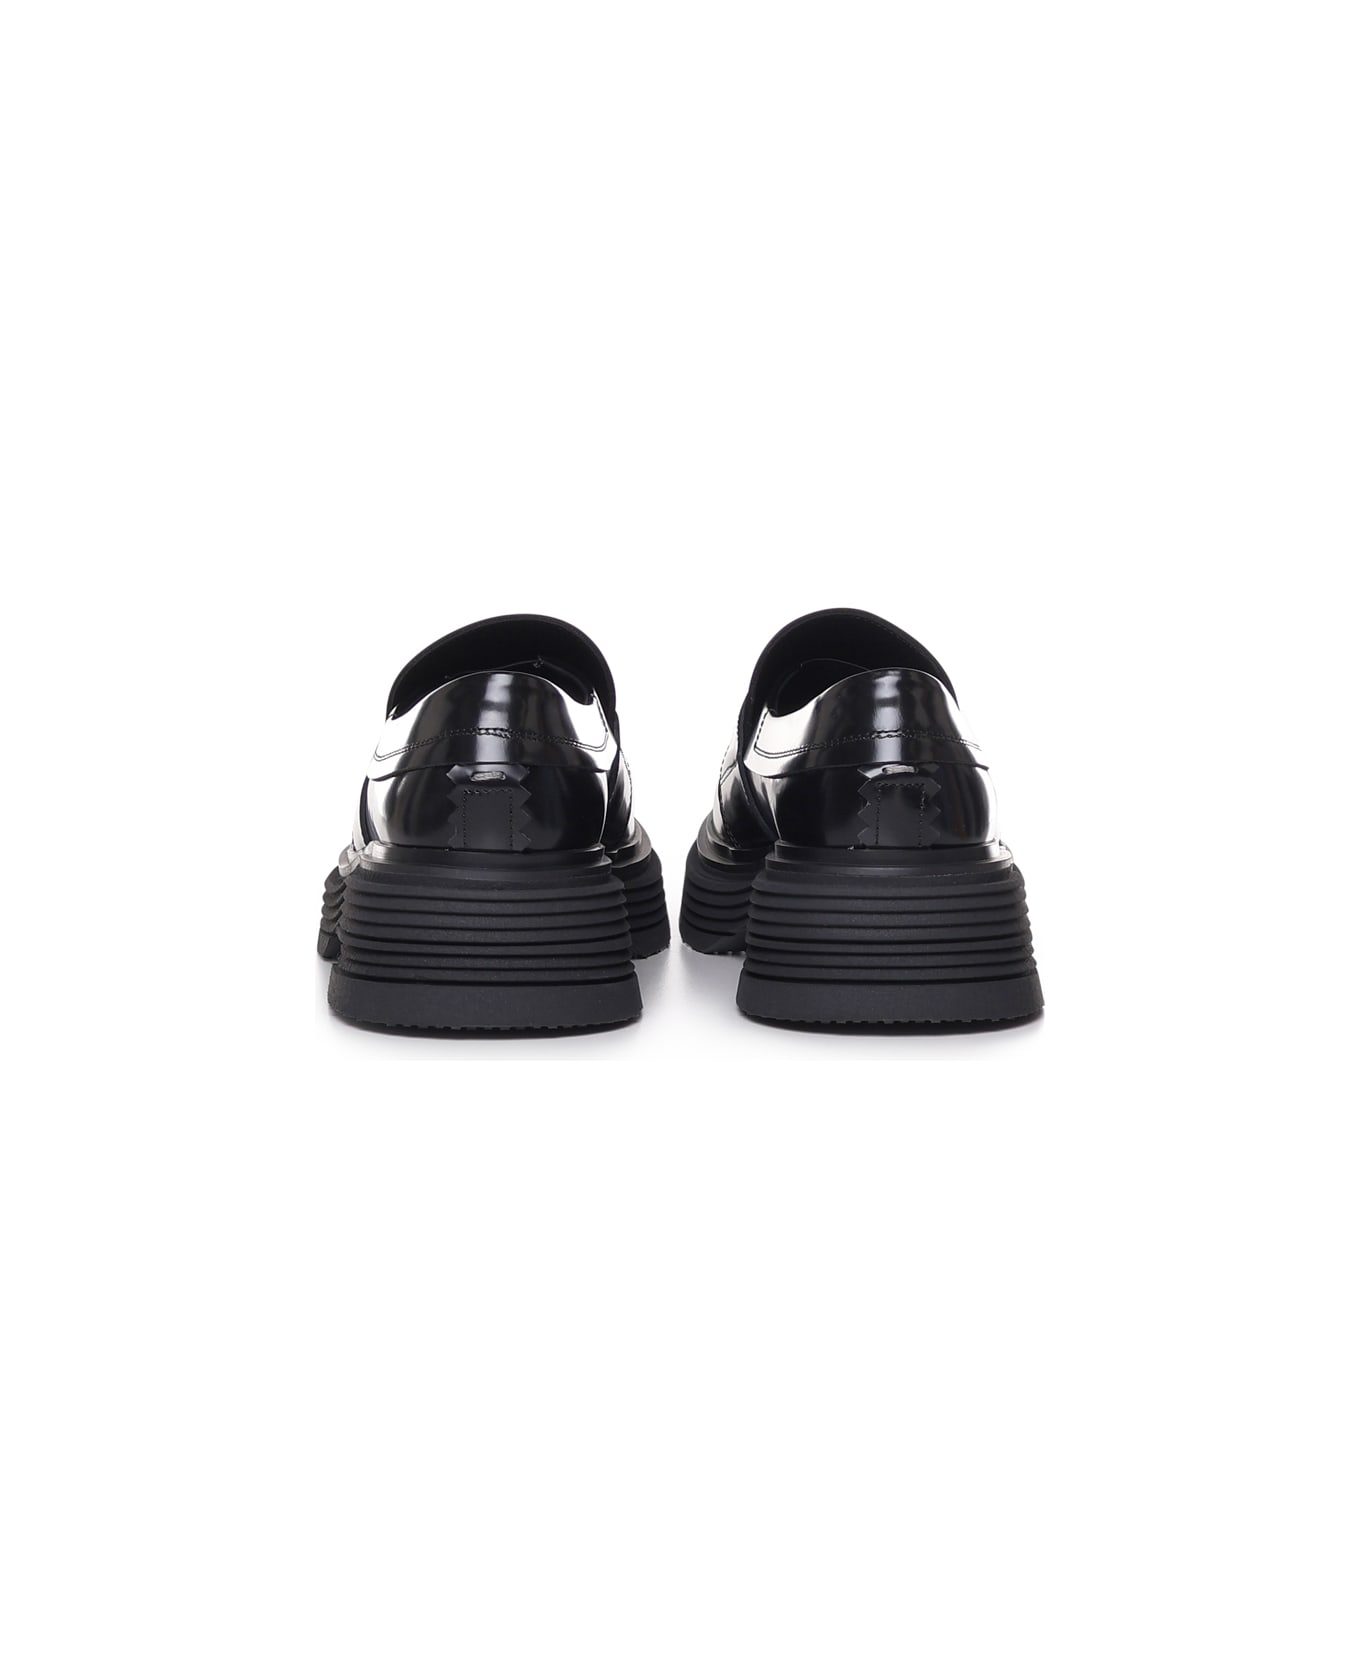 The Antipode College Moccasin - Black